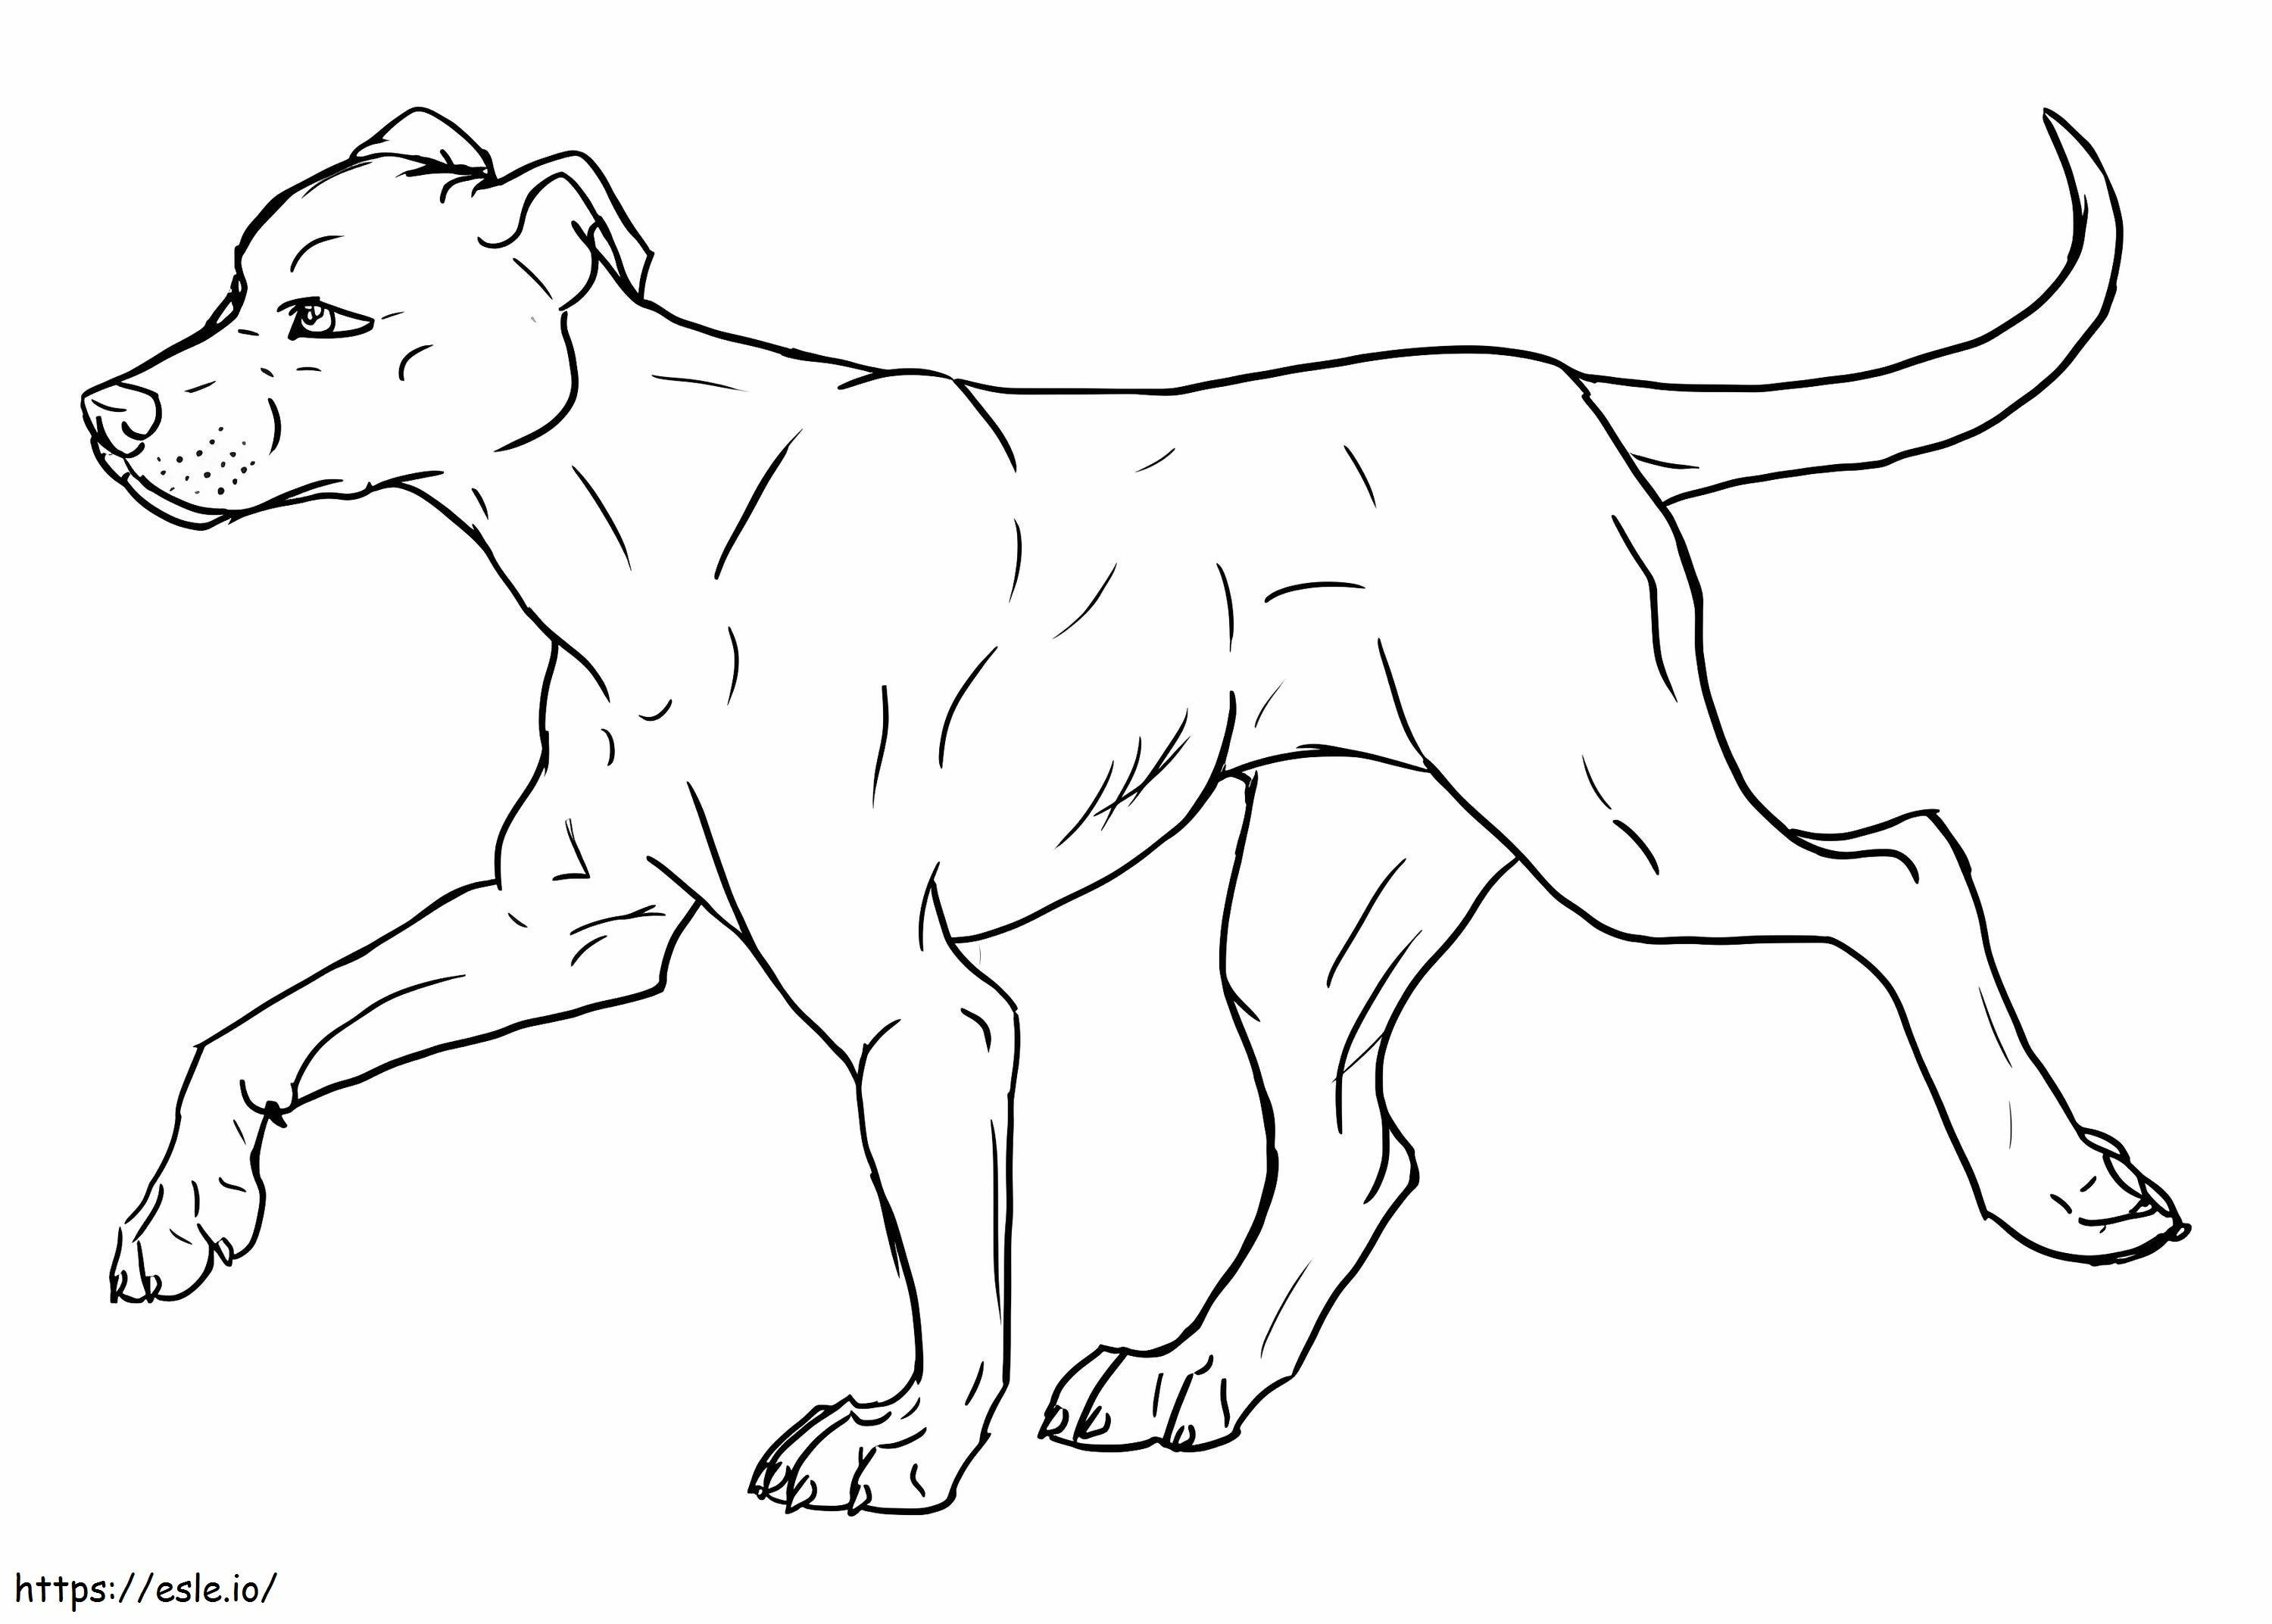 Pitbull Is Walking coloring page